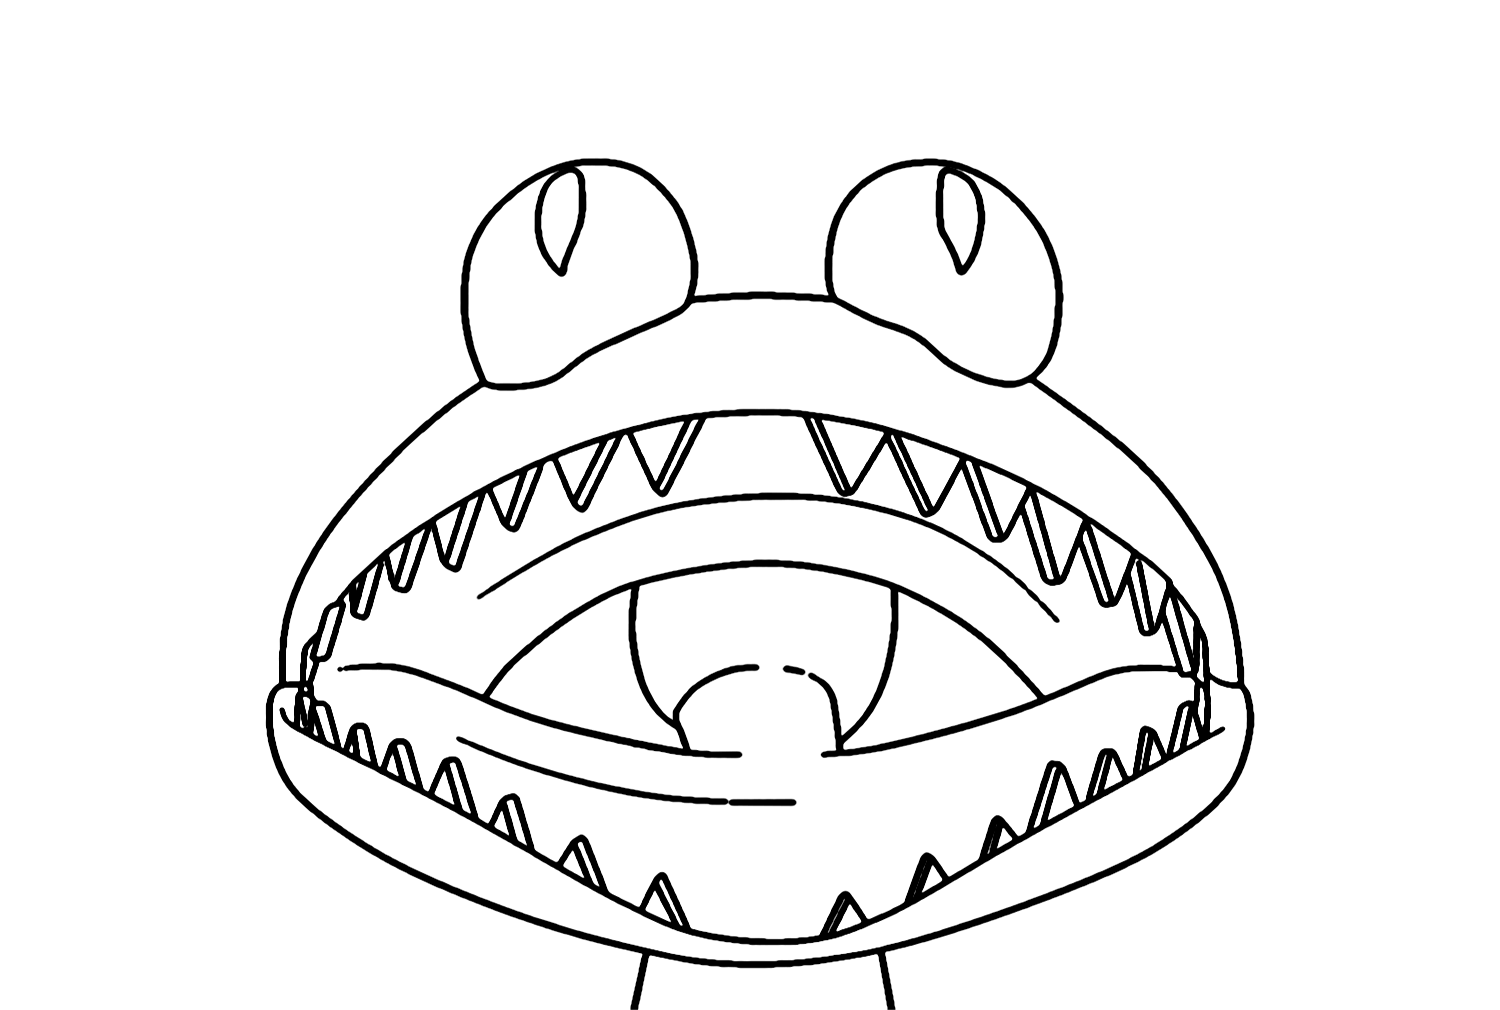 Cyan Rainbow Friends Coloring Pages - Free Printable Coloring Pages